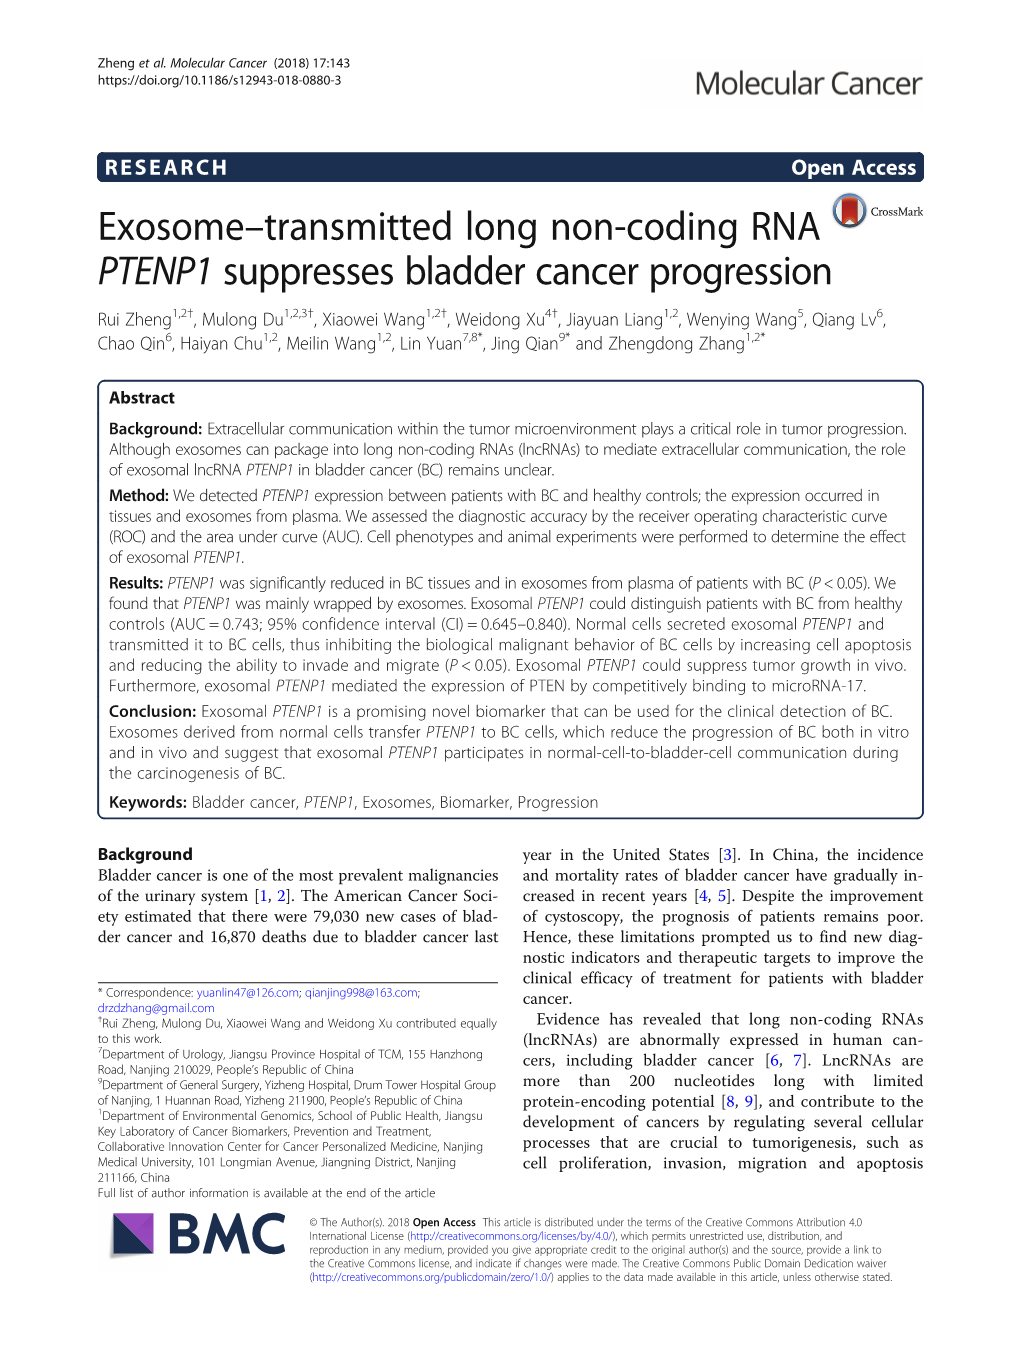 Exosome–Transmitted Long Non-Coding RNA PTENP1